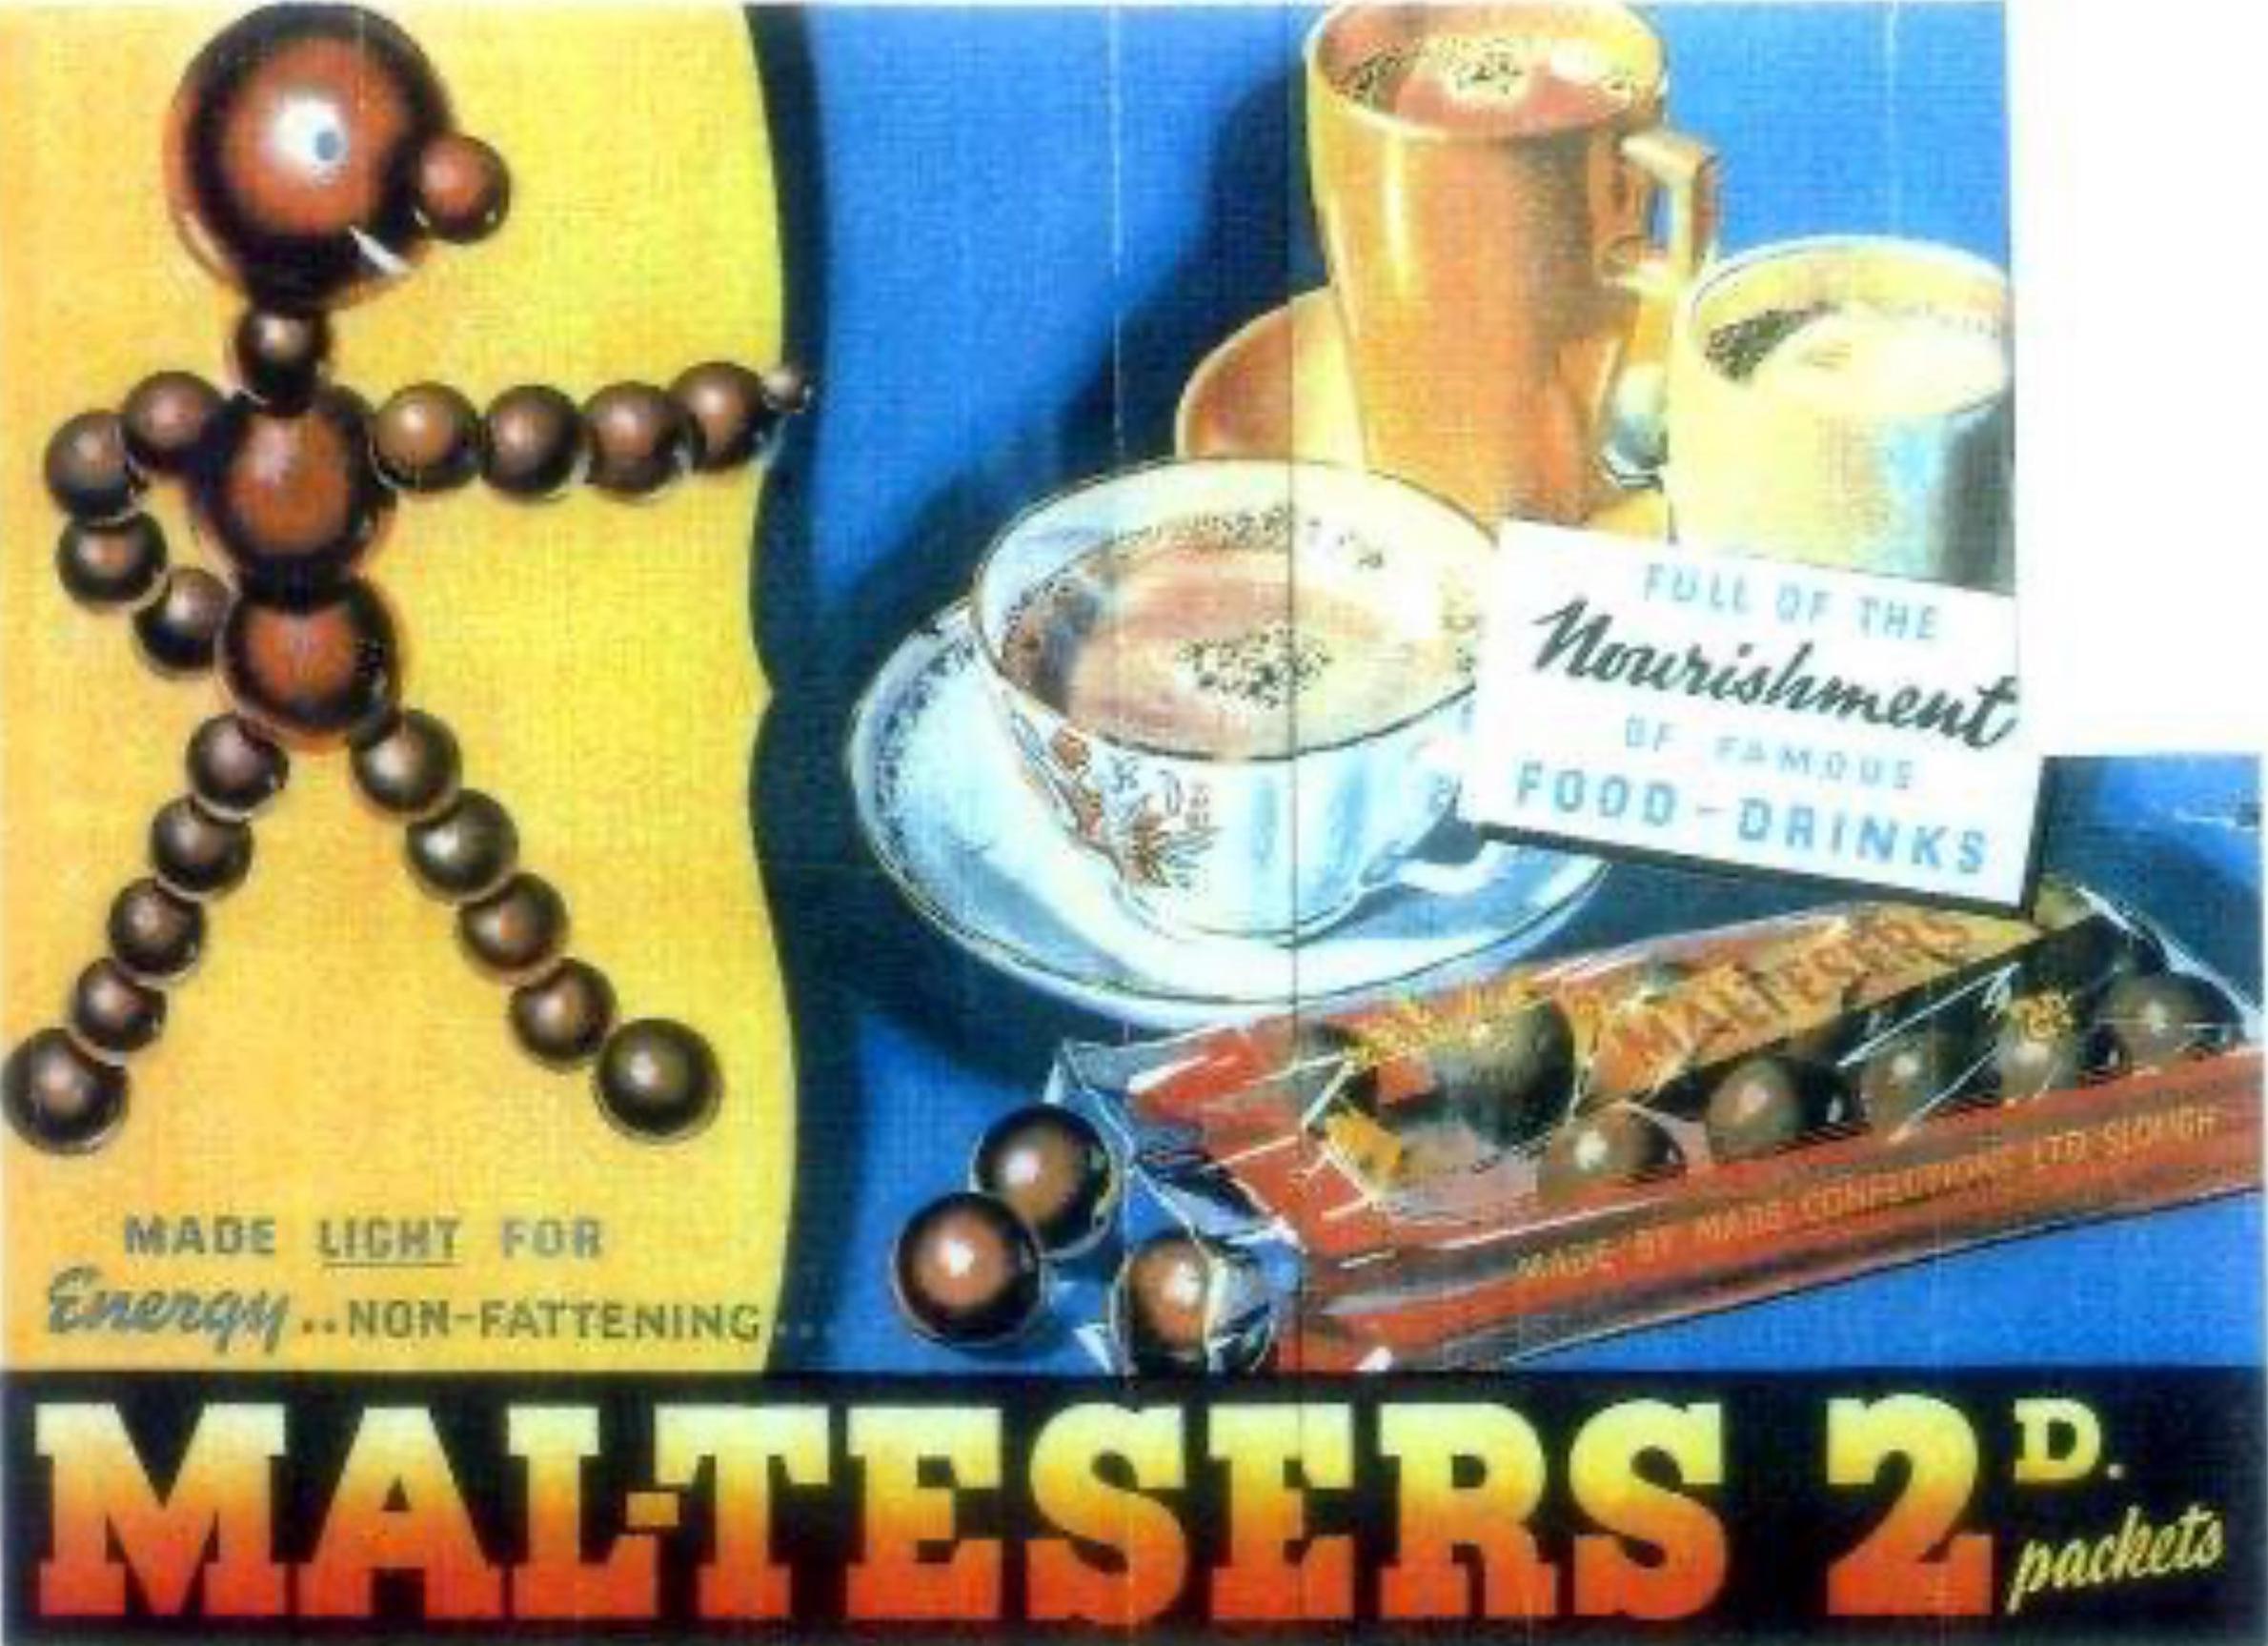 Maltesers advertisement from 1930s showing a figure made from Maltesers pointing to a pack of Maltesers and cups of coffee